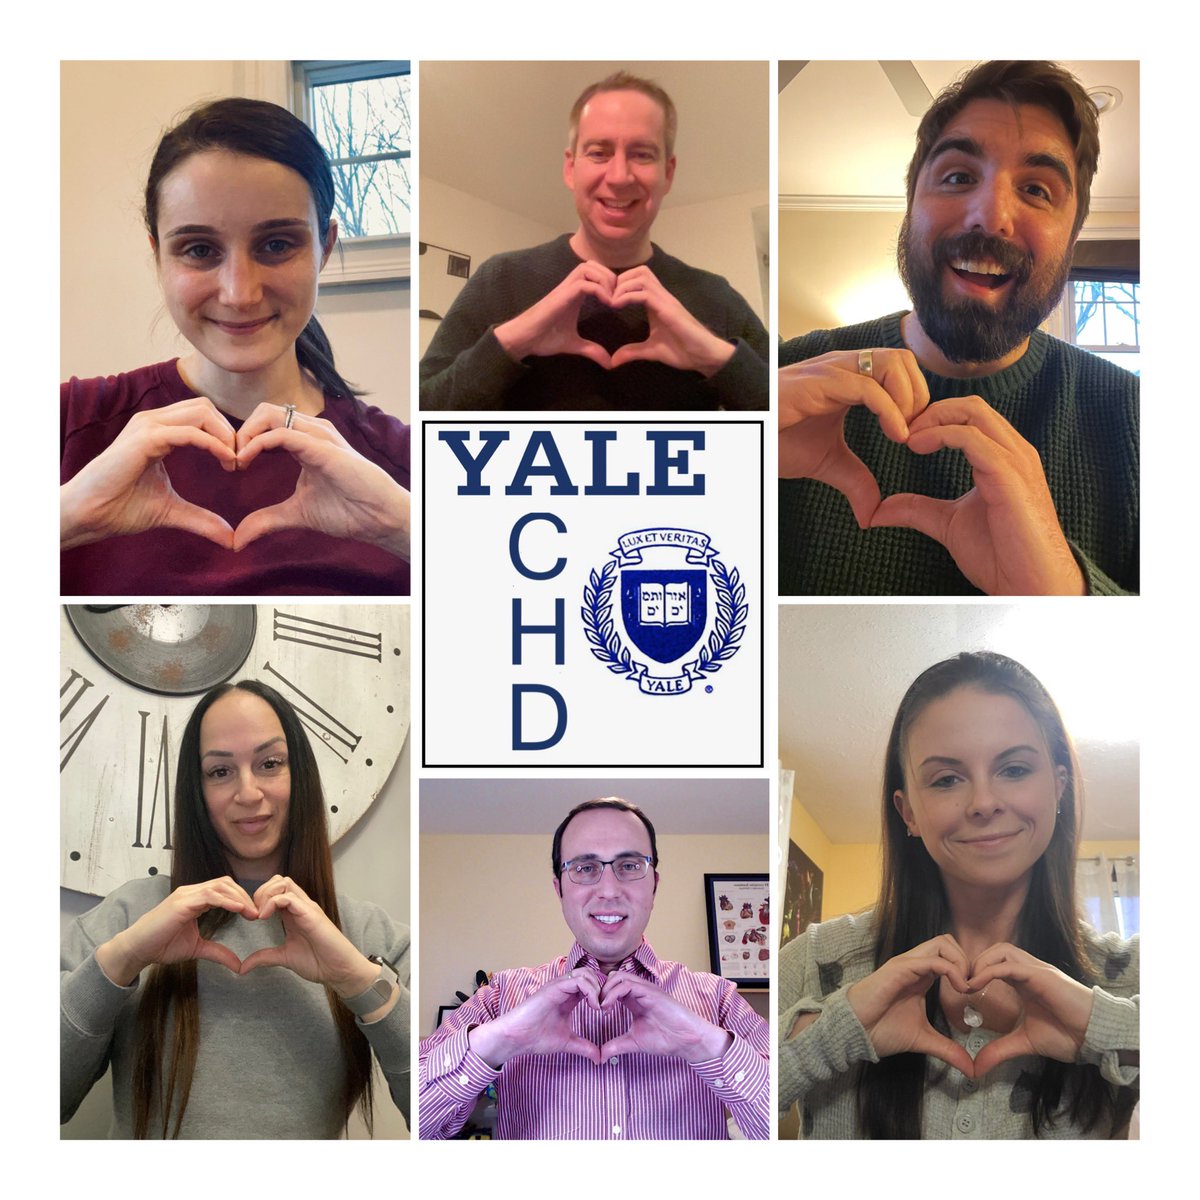 #ValentinesDay is great… but it is also #CongenitalHeartDefects awareness day! Show us your best heart selfie…and we might post the “bloopers”

We ❤️all of our #CHD patients. 

Xoxoxox

Yale ACHD
#chdawareness #CHDAwarenessDay #MedTwitter #CardioTwitter